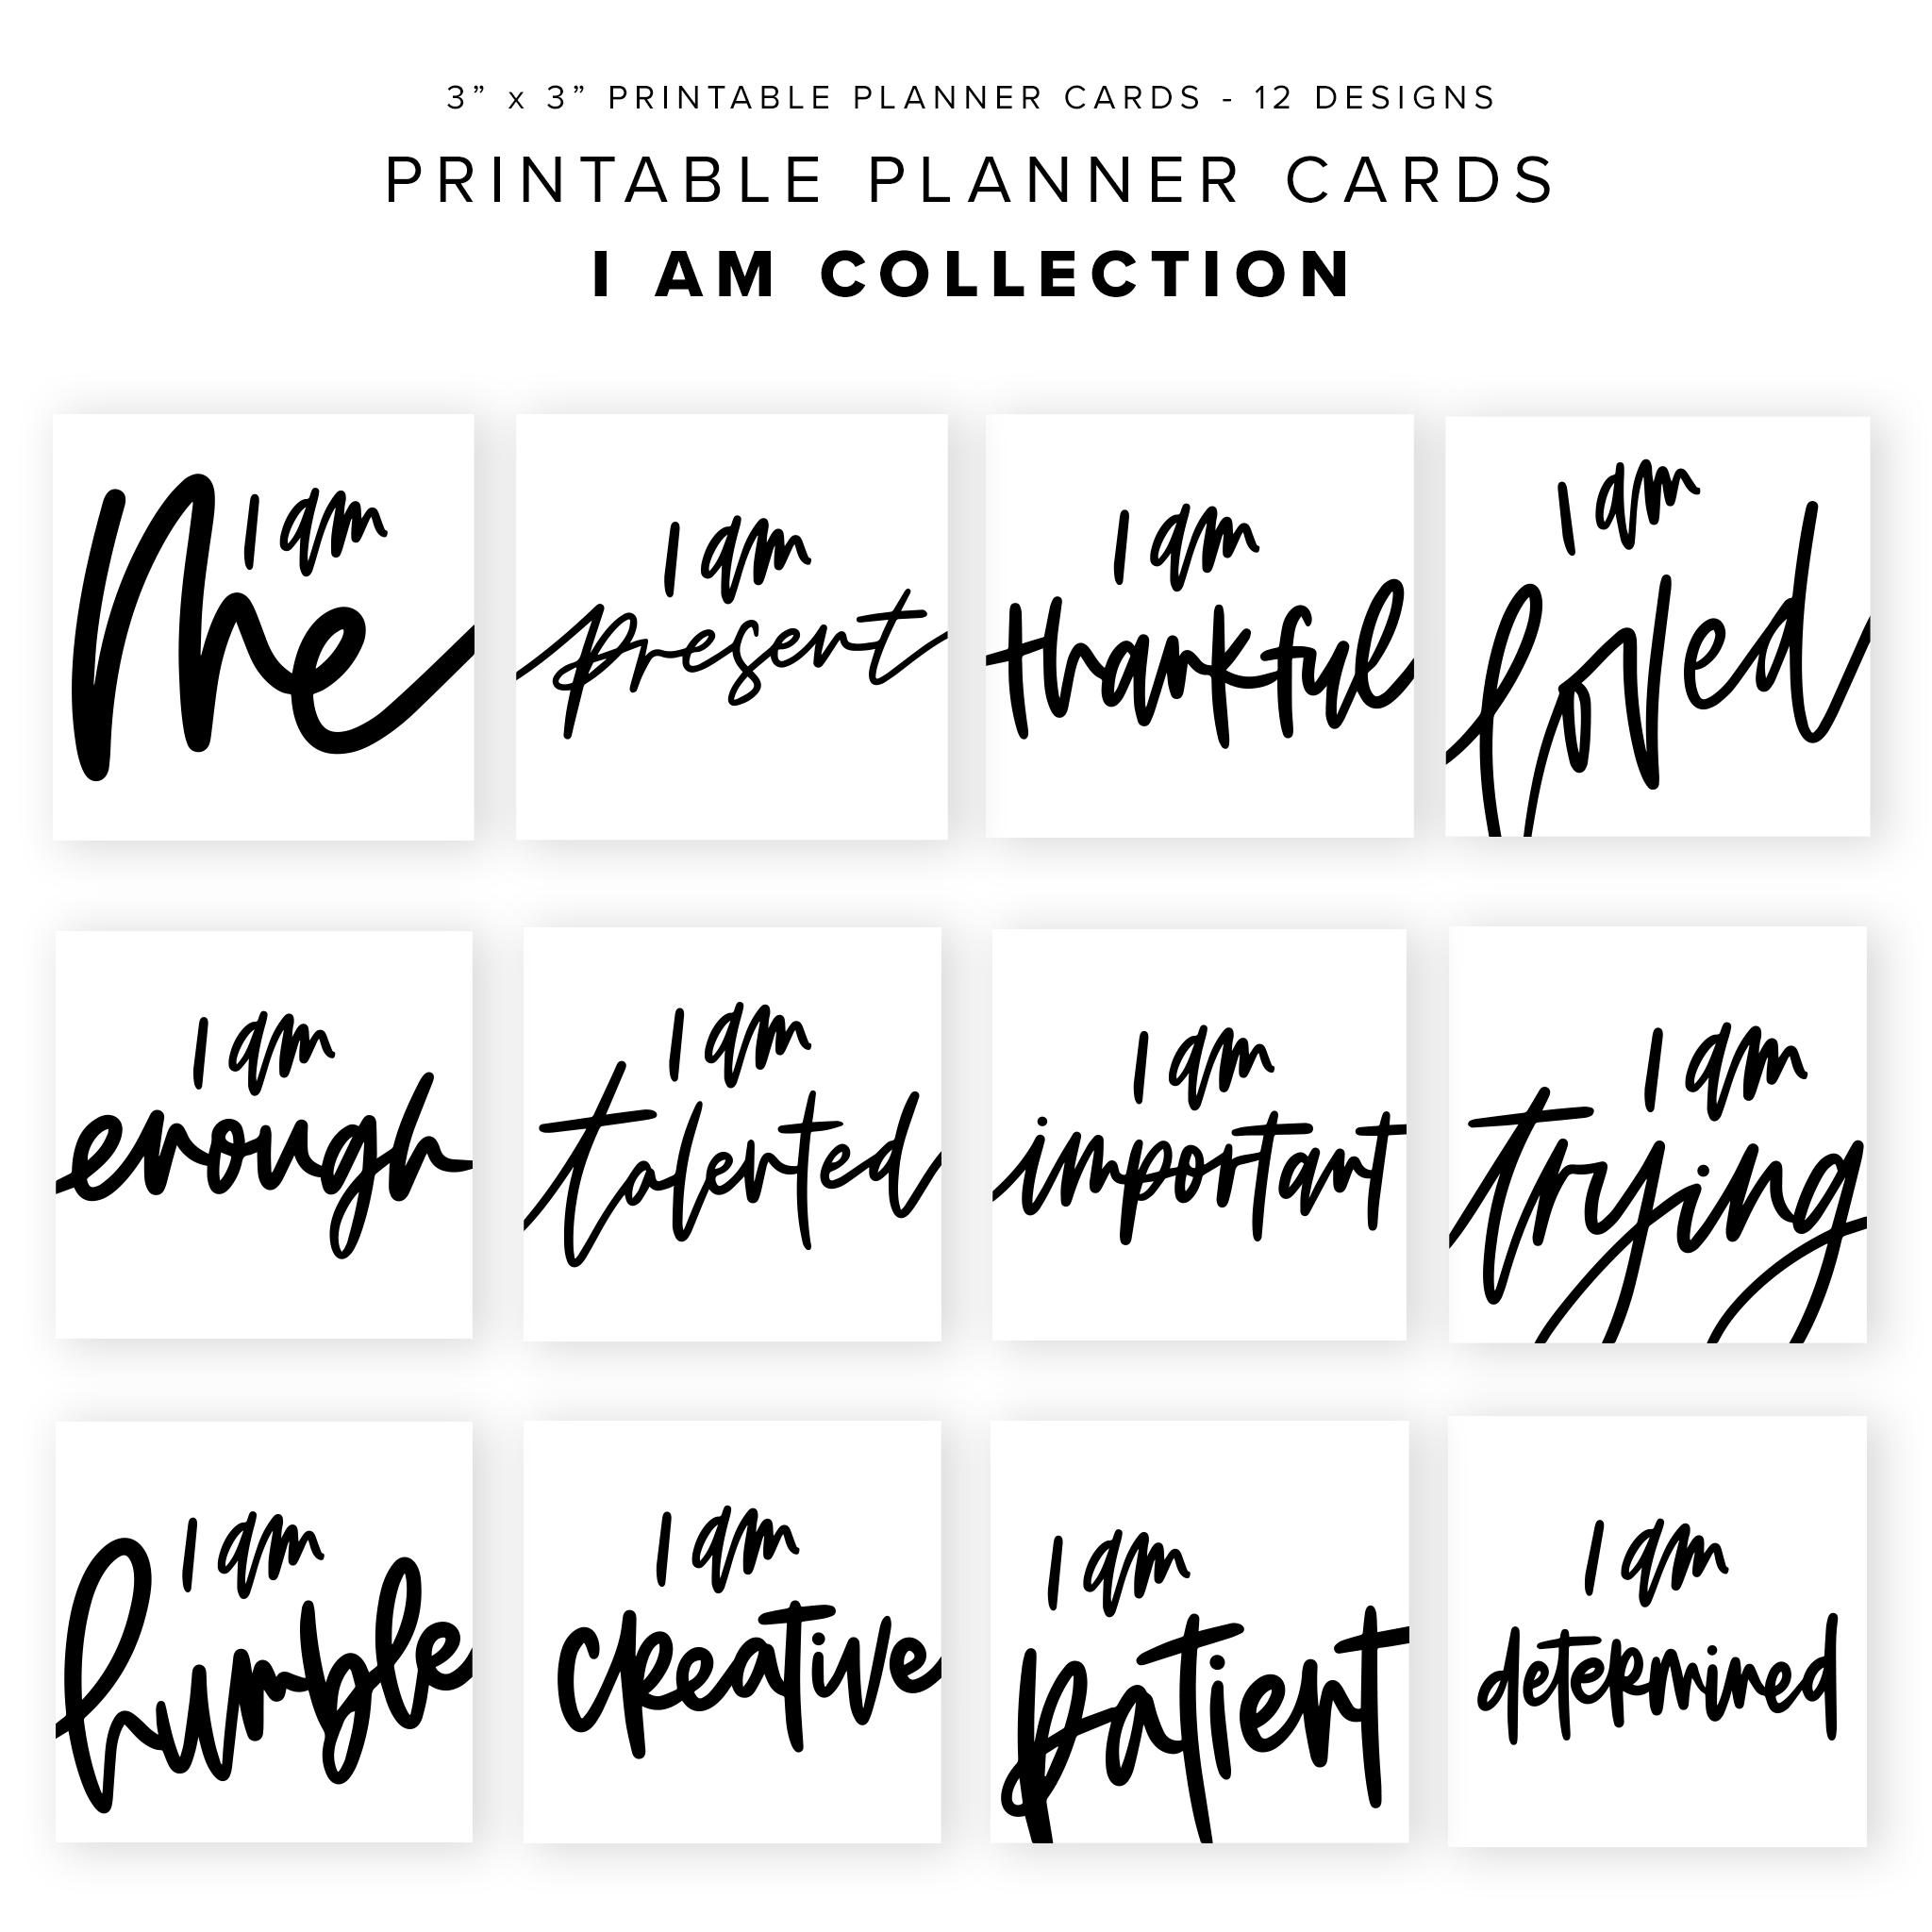 PPC02 - I AM - Printable Planner Cards